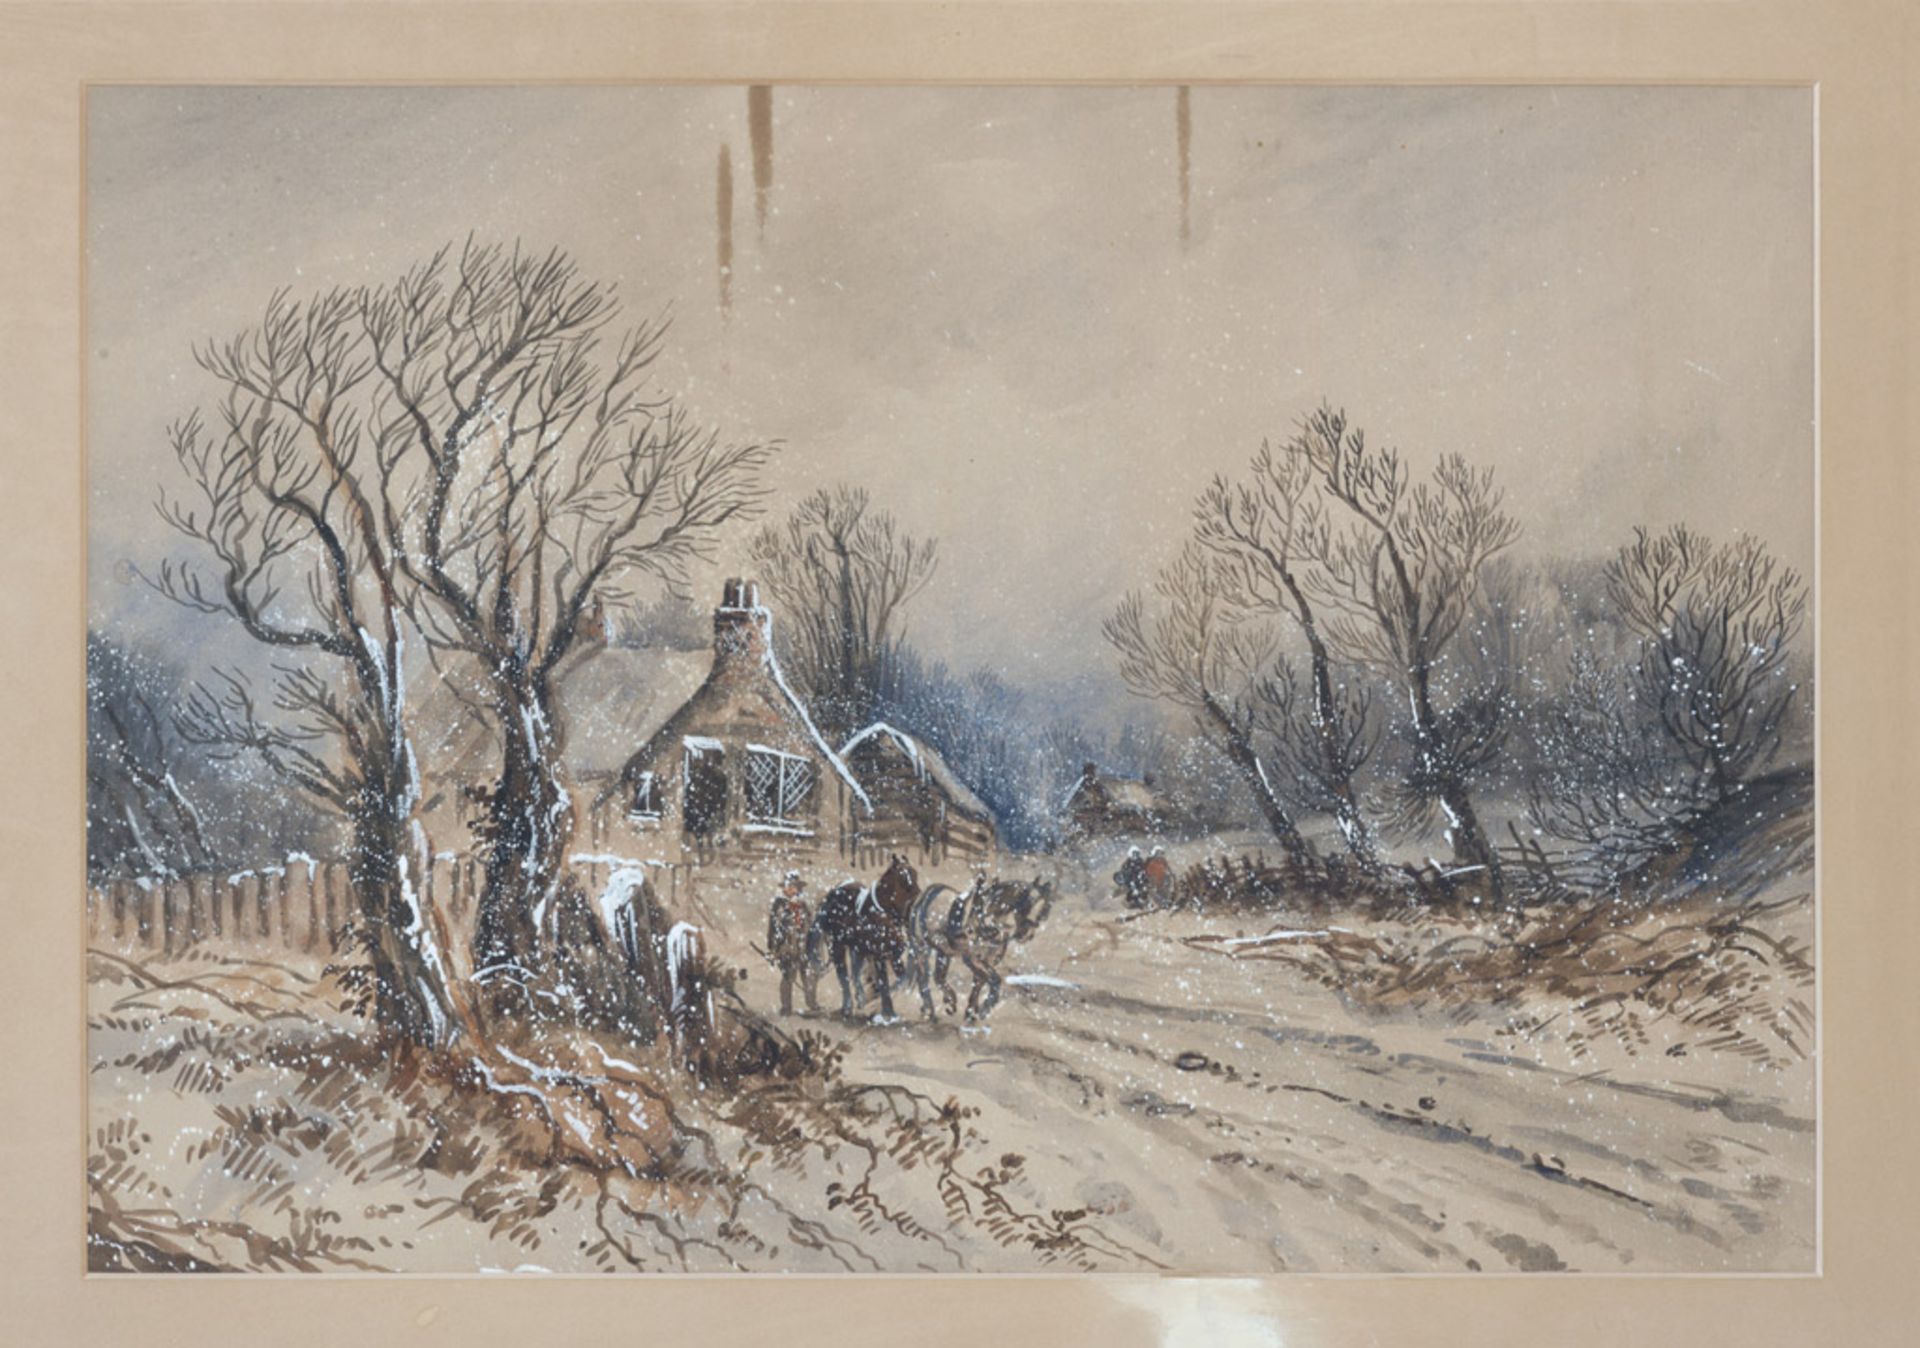 EUROPEAN PAINTER, LATE 19TH CENTURY. Winter landscapes with farms and horses. A pair of mixed